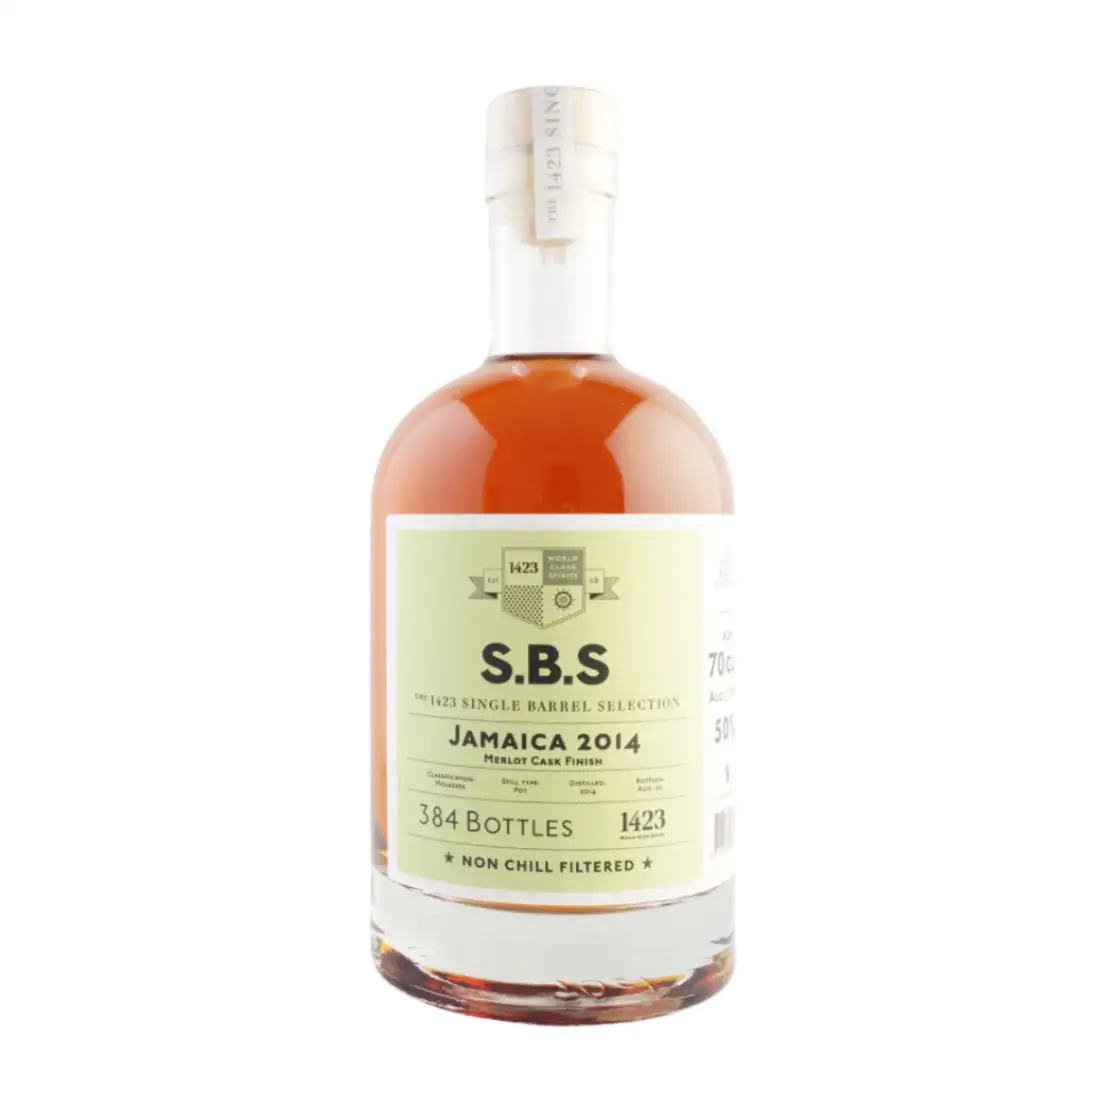 Image of the front of the bottle of the rum S.B.S Jamaica 2014 Merlot Cask Finish